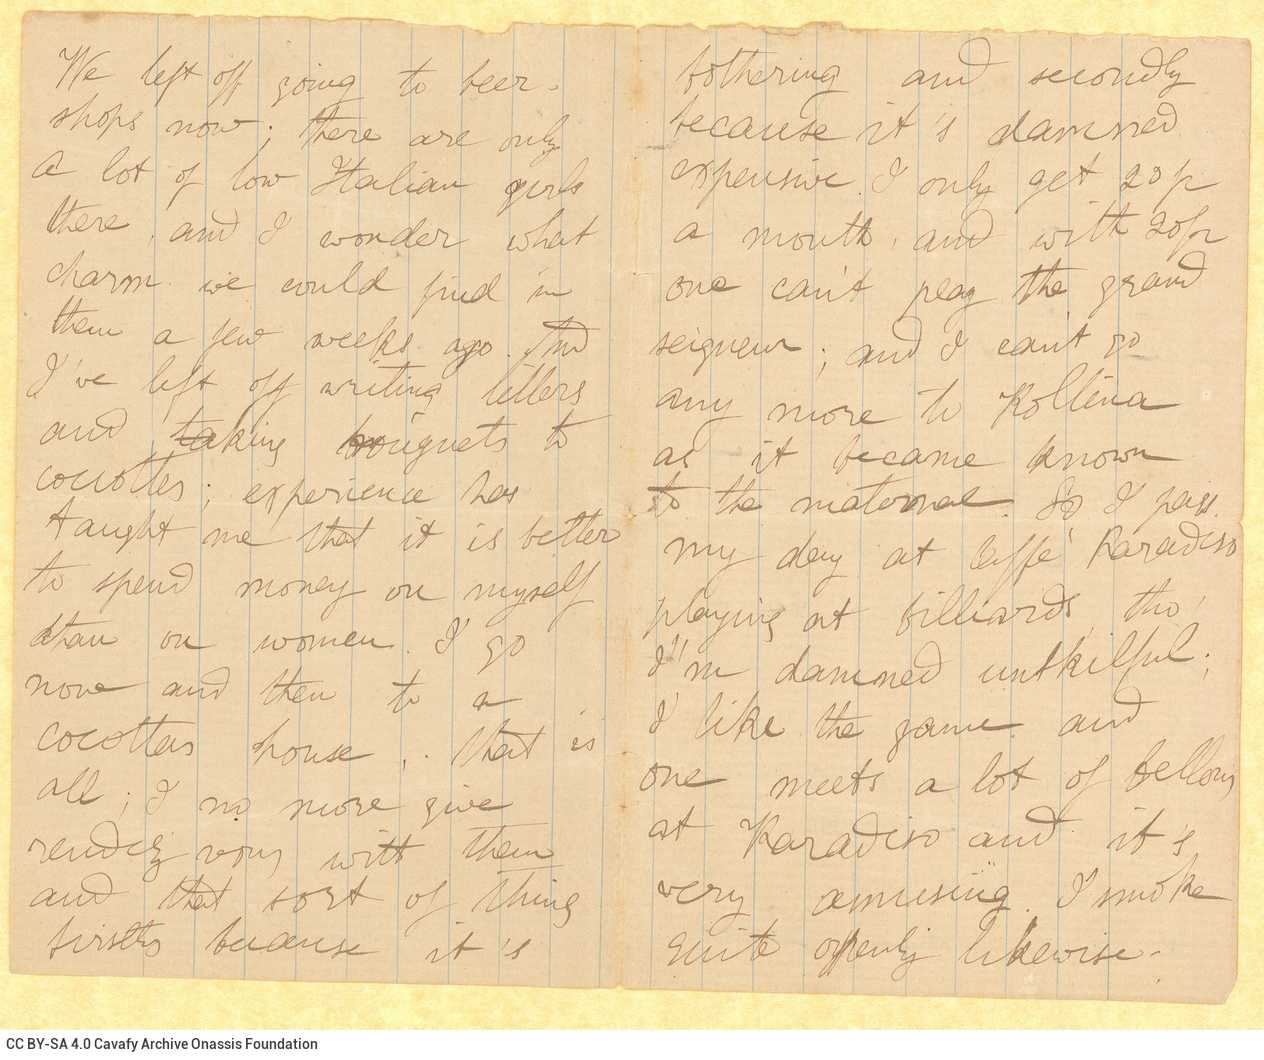 Handwritten letter by Mike Ralli to Cavafy on two bifolio, with notes on all sides except for the verso of the last sheet. De